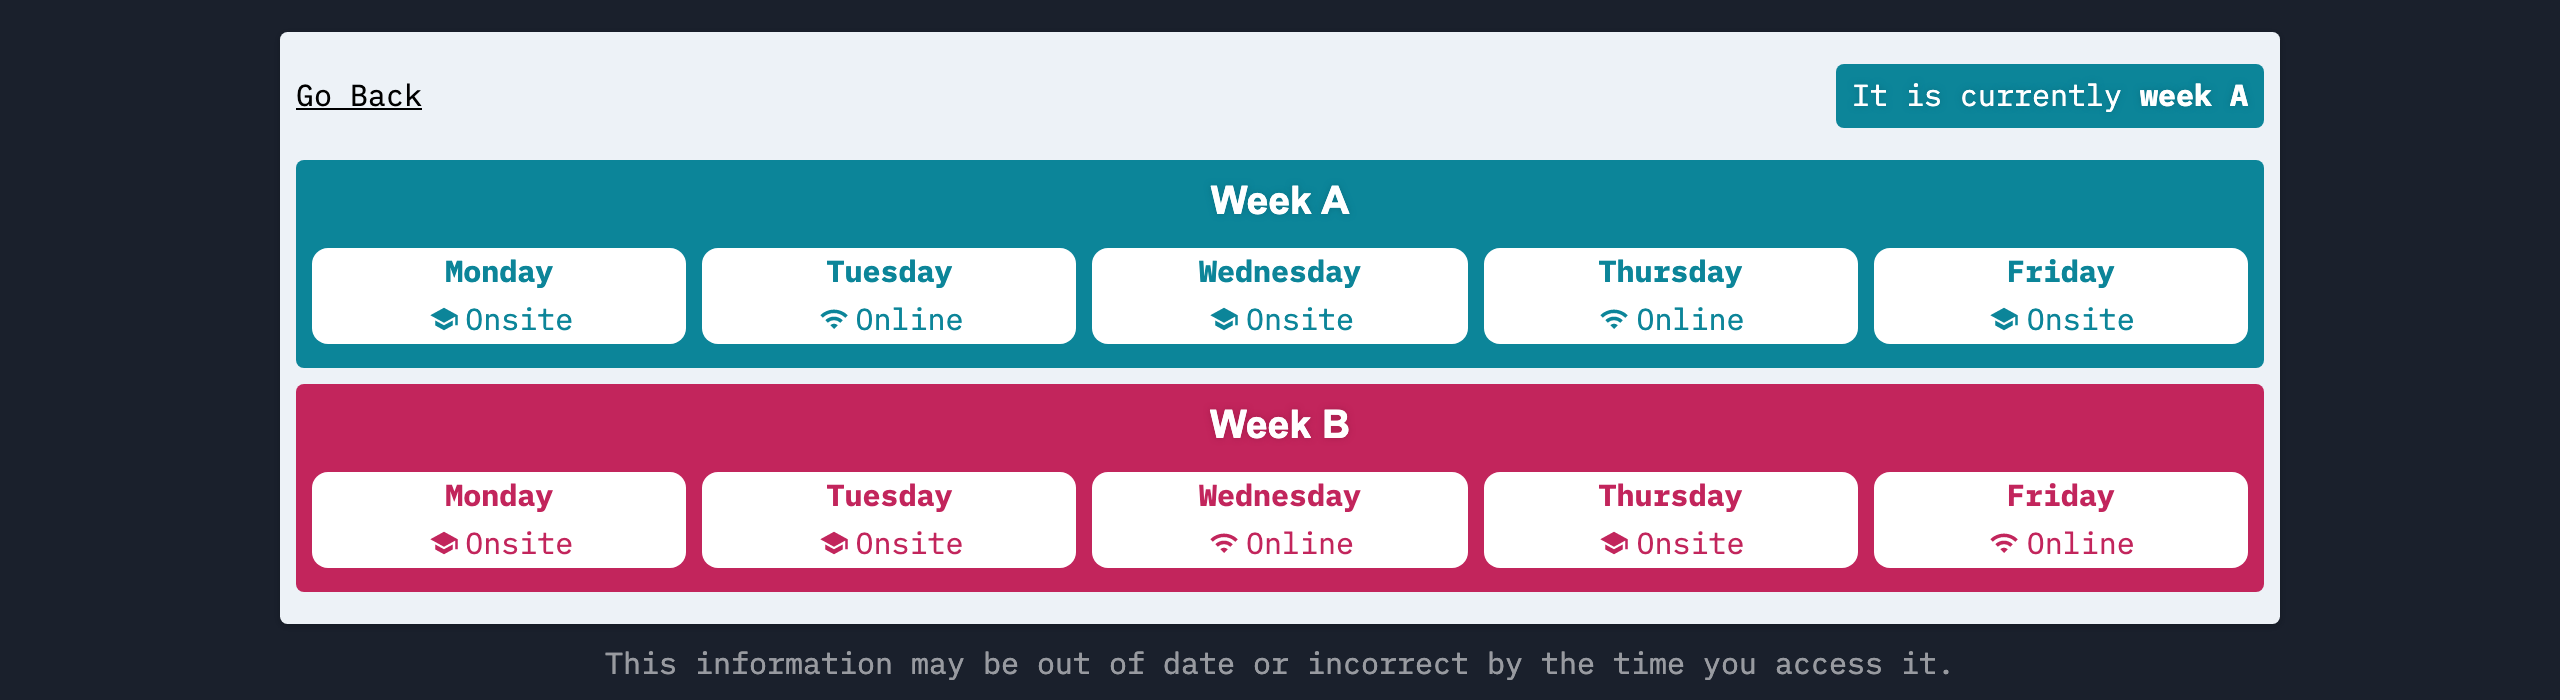 A specially designed weekly timetable page for online learning requirements during the 2020 Covid-19 lockdown.